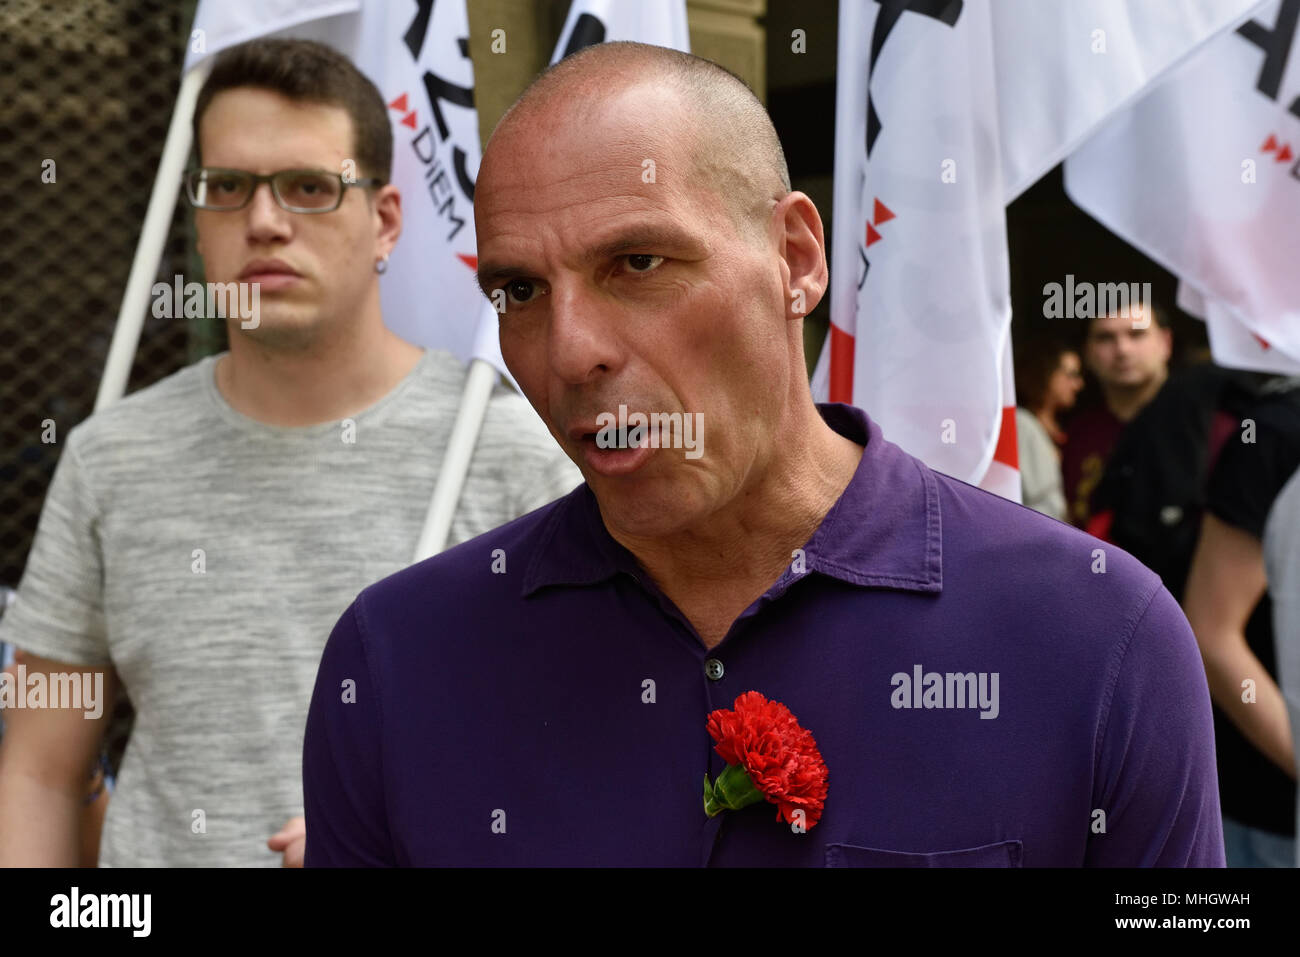 Athens, Greece. 1st May 2018. Former Greek Finance Minister Yanis Varoufakis takes part in a May Day rally in Athens, Greece. Credit: Nicolas Koutsokostas/Alamy Live News. Stock Photo